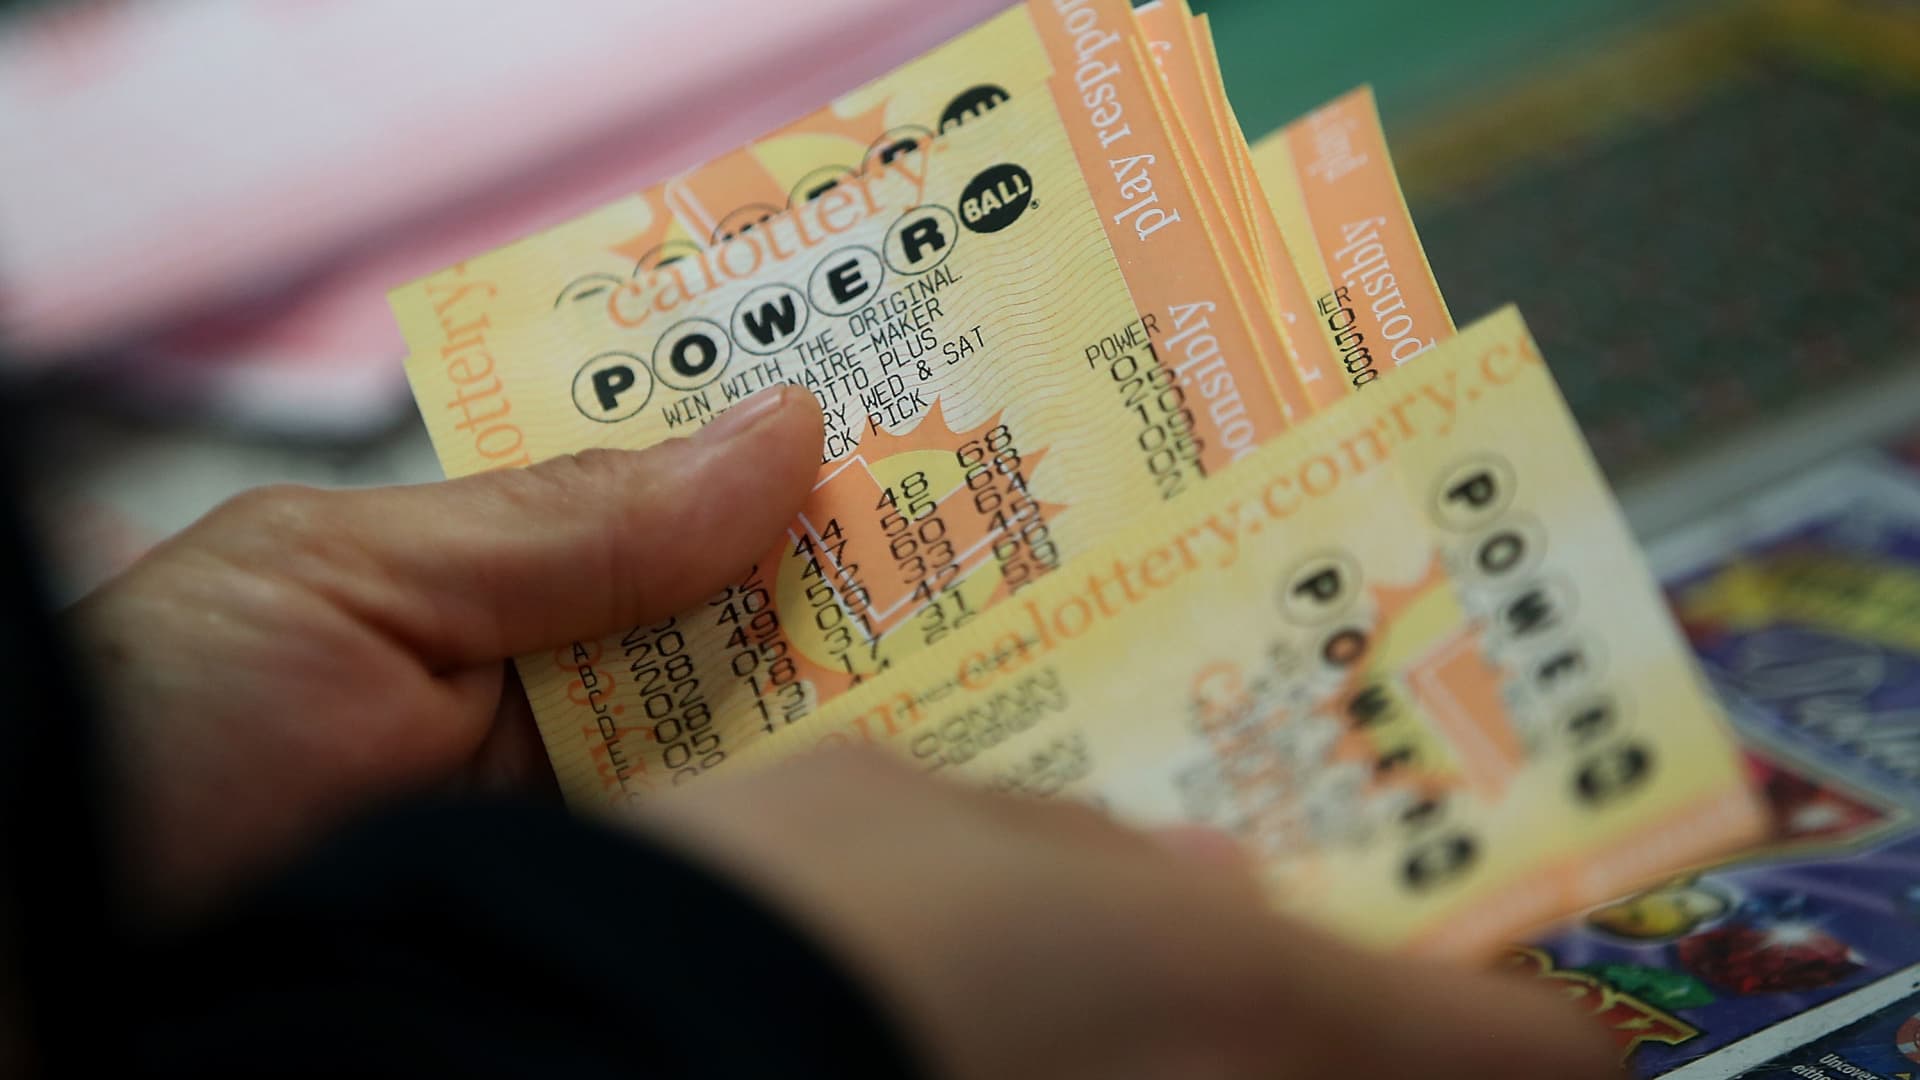 Powerball hits $1.3 billion. Most people still buy tickets in person, but more lottery apps emerge